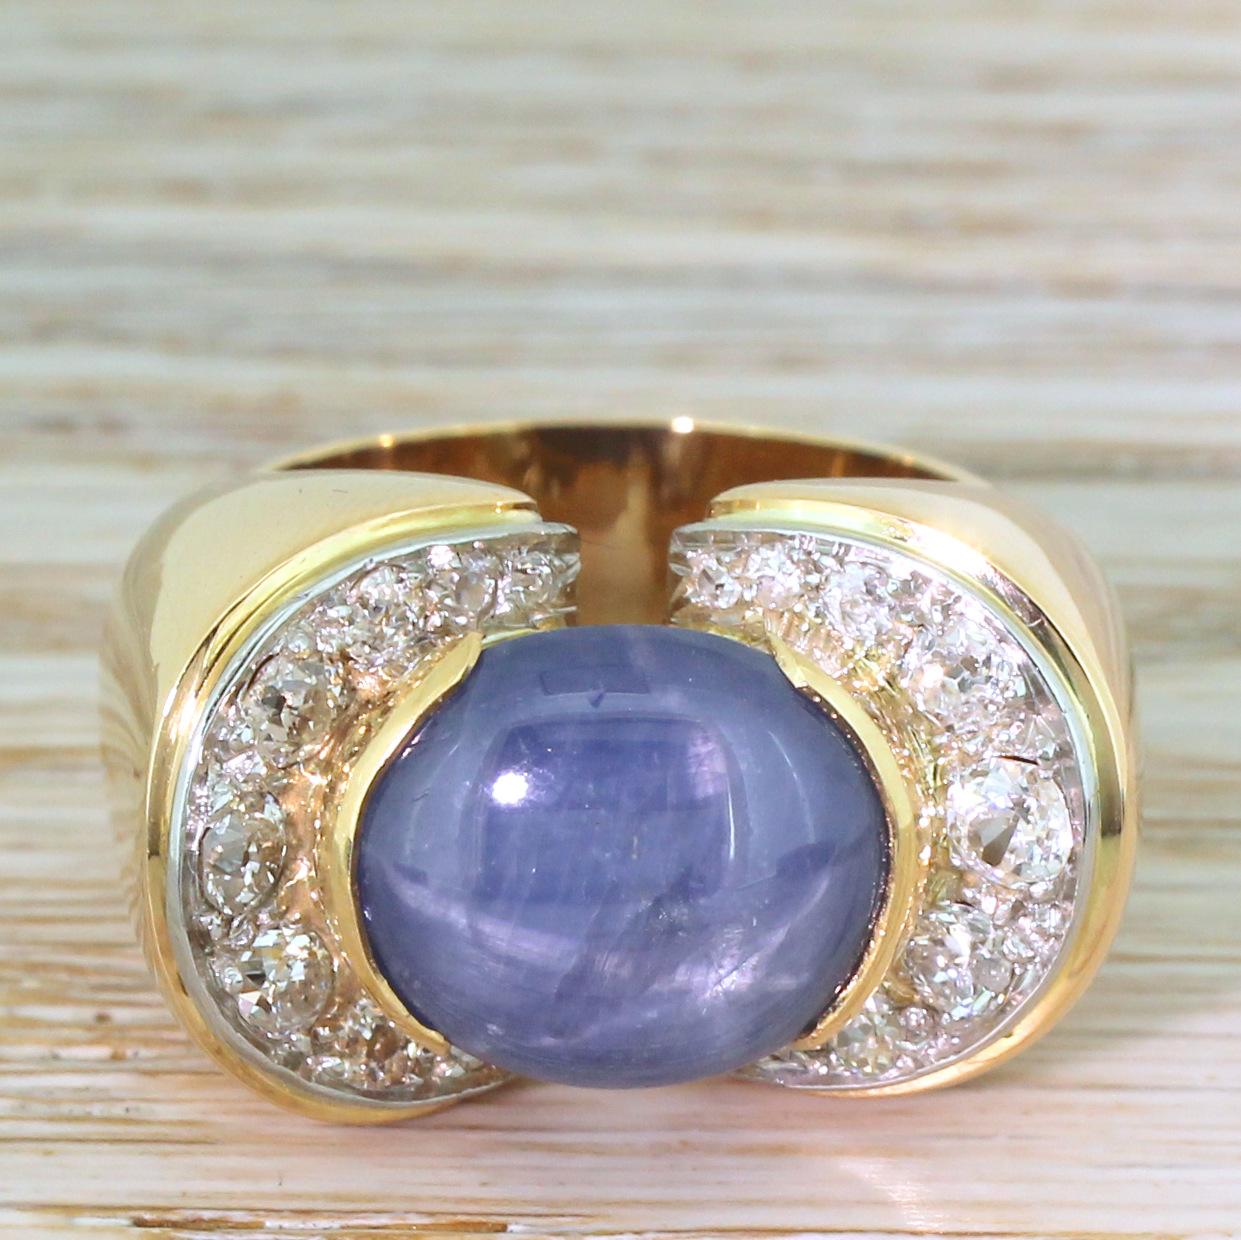 One of the most spectacular rings we’ve ever had the pleasure or marketing. The wonderfully chunky piece features a light, medium blue star sapphire which, in sunlight, displays a strong and clear asterism. The sapphire sits in a daringly shaped